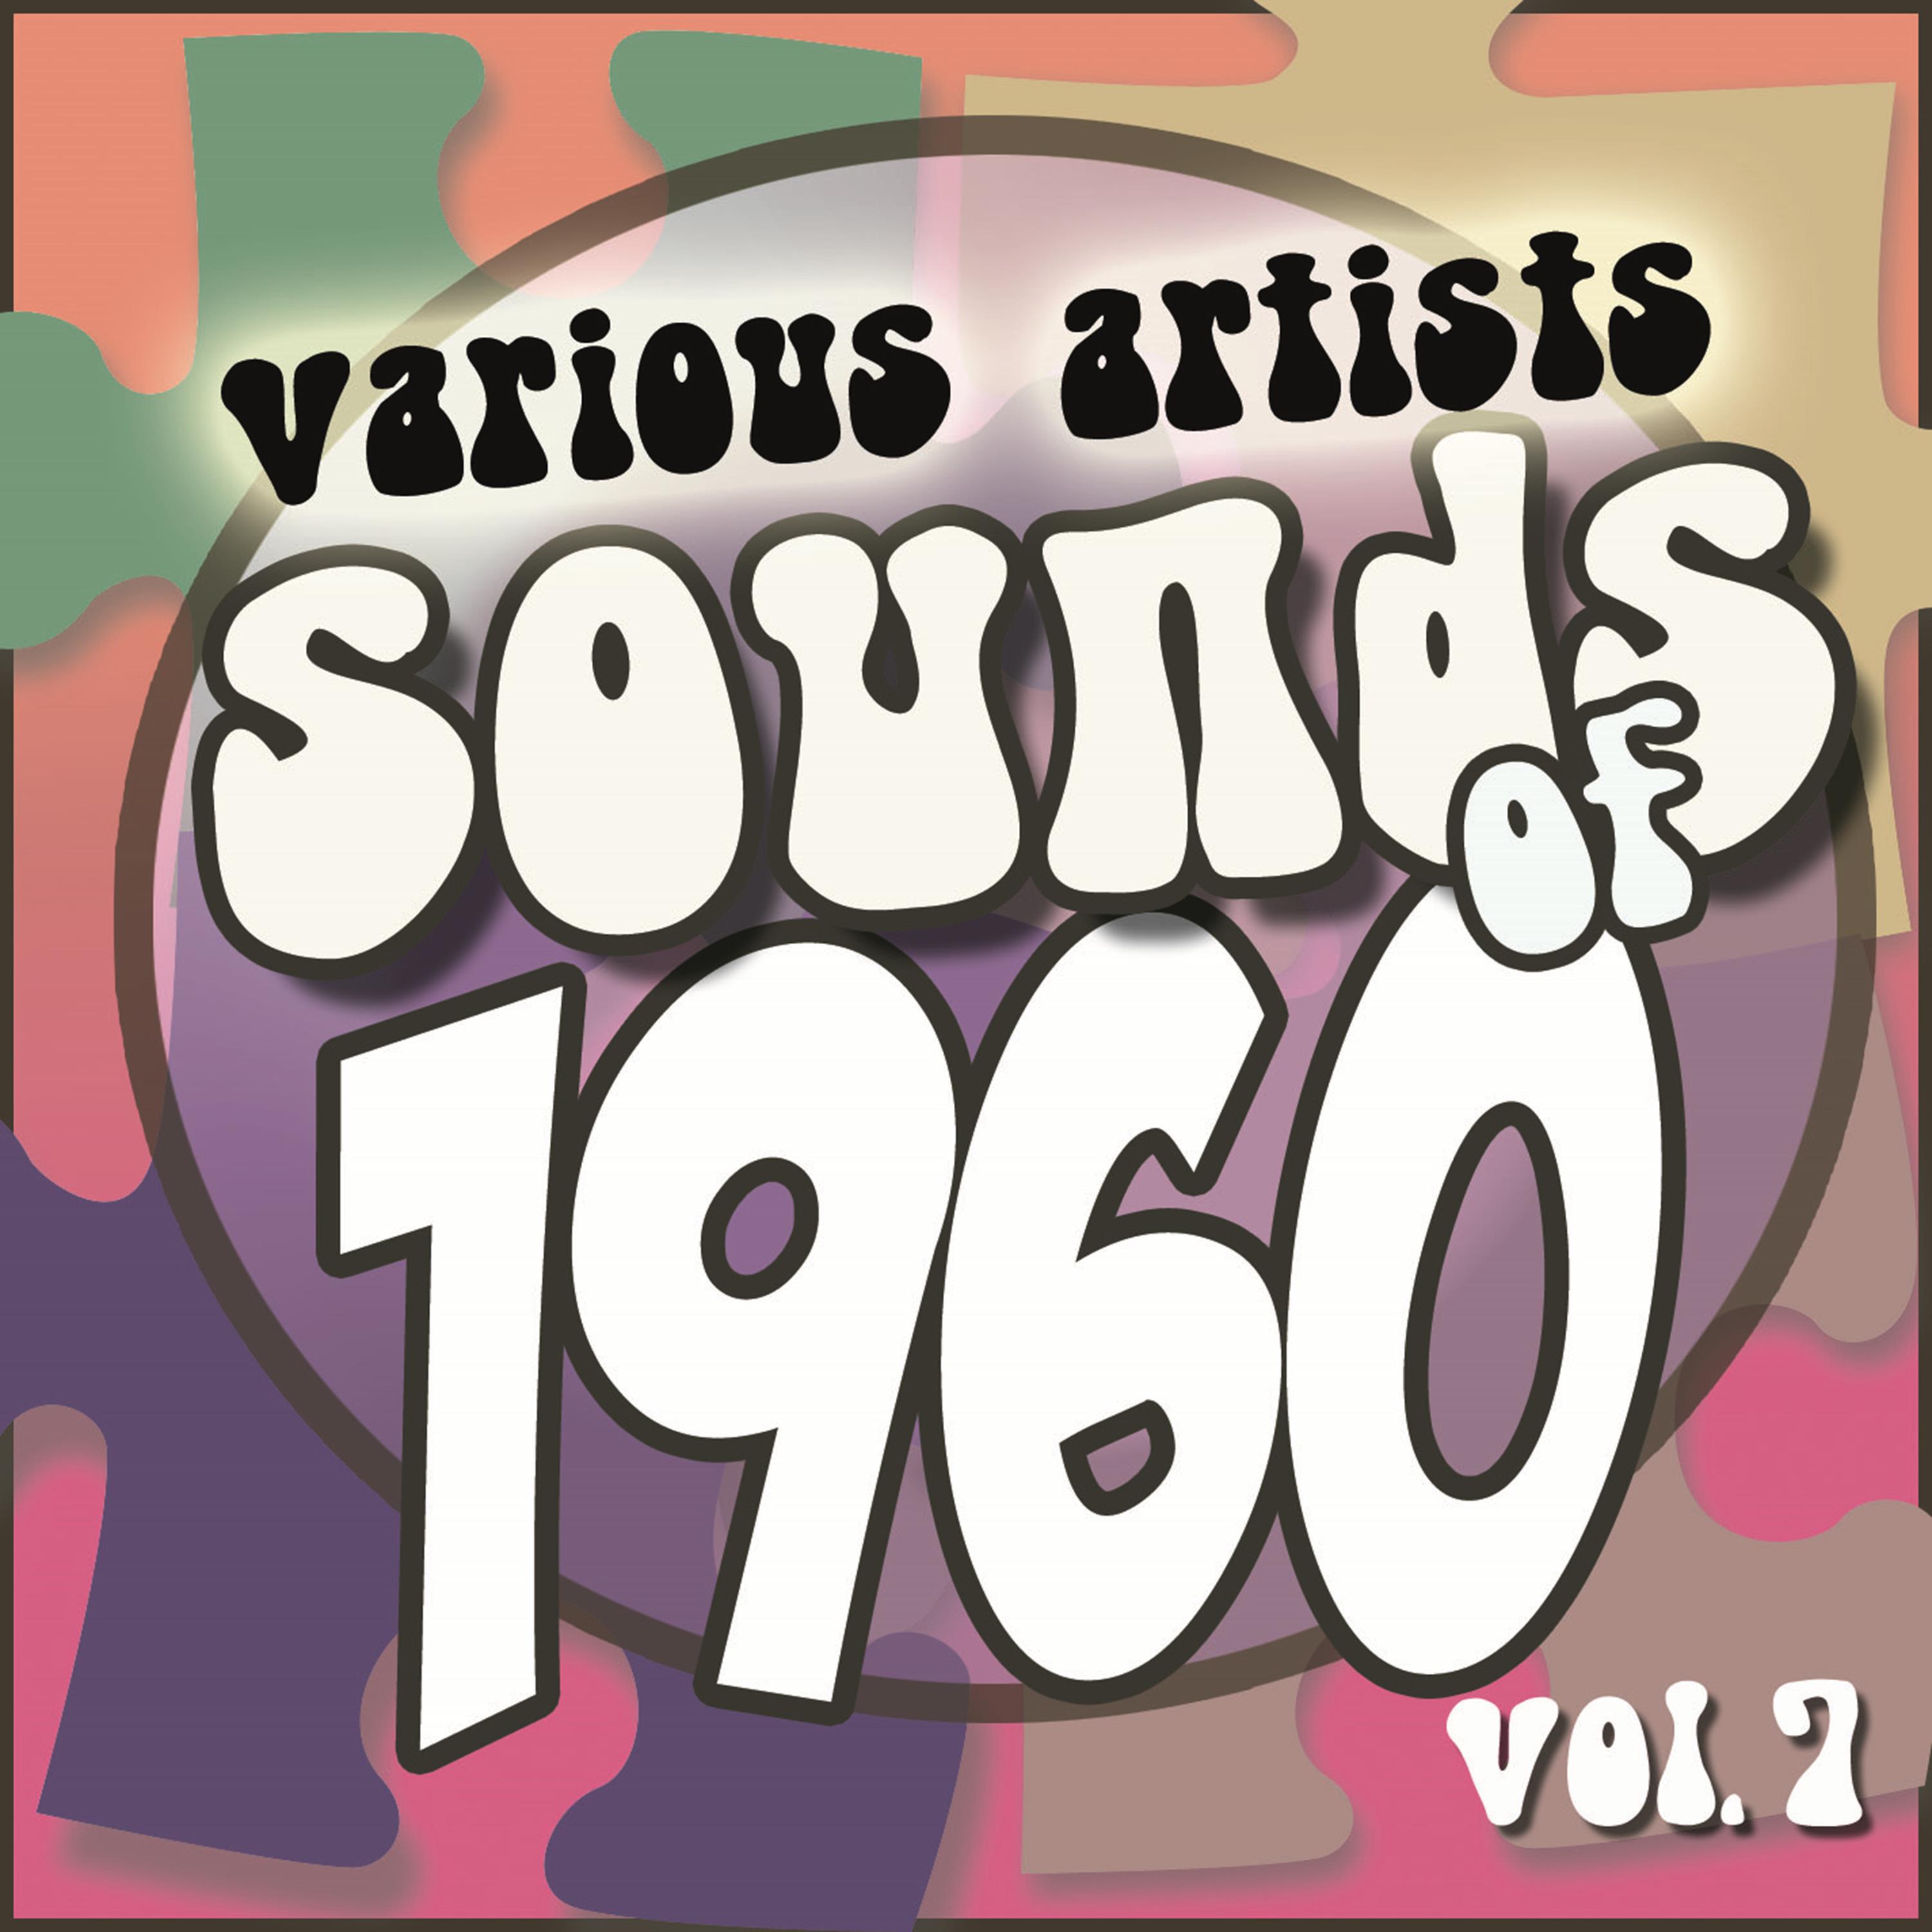 Sounds of 1960, Vol. 7 (Remastered)